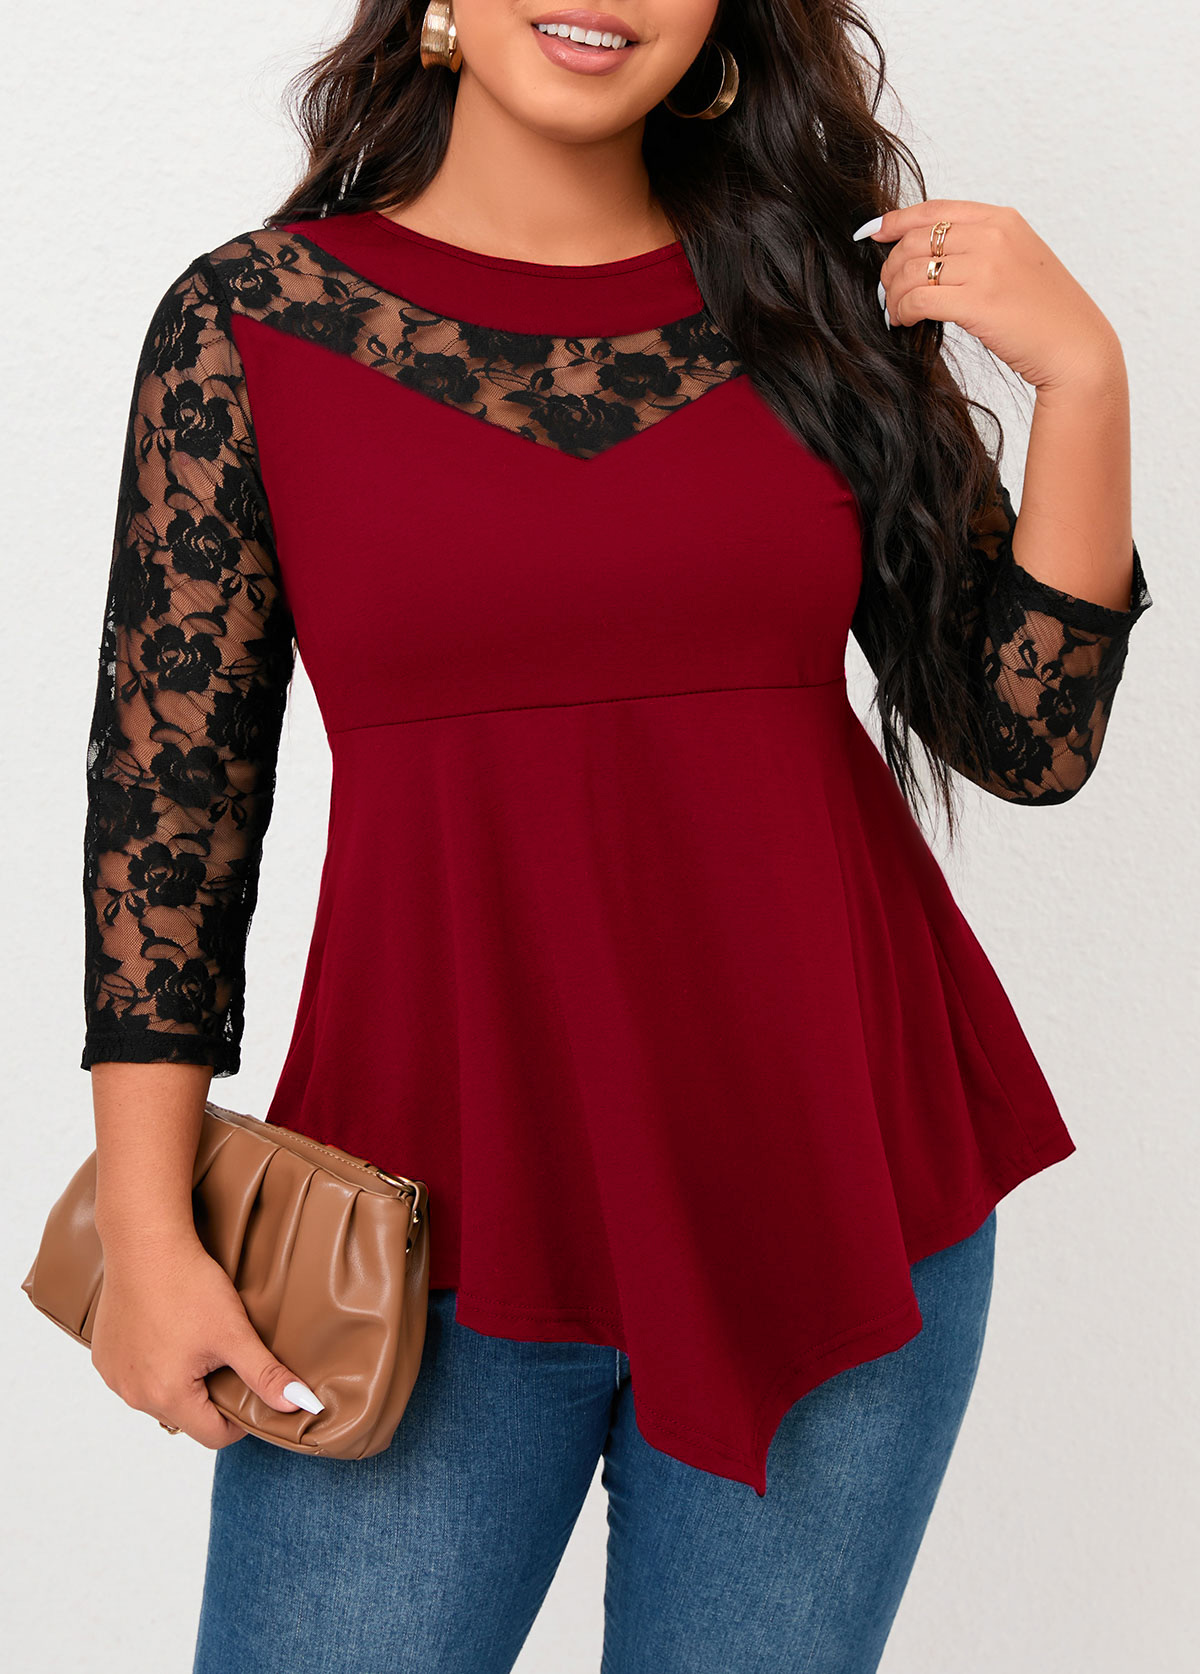 Wine Red Lace Plus Size T Shirt